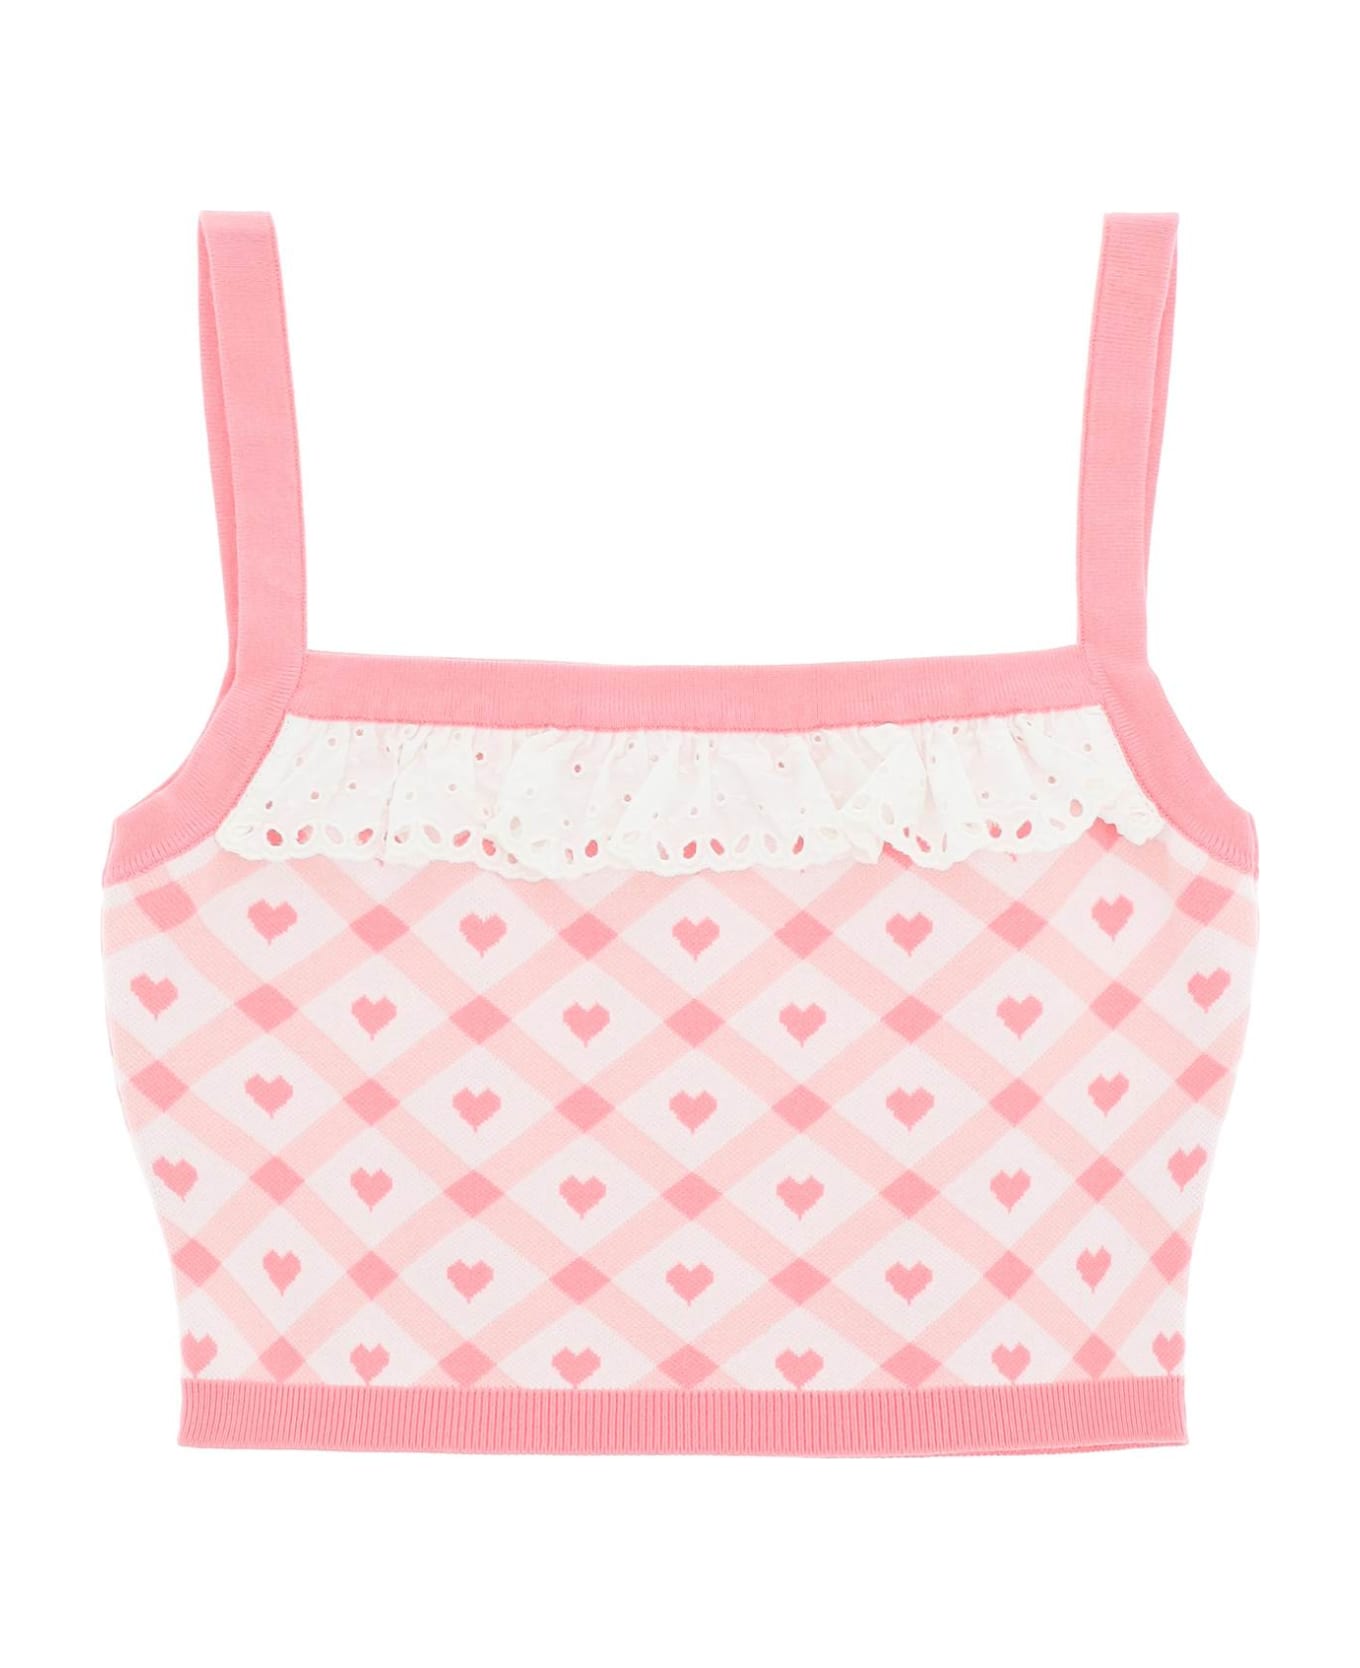 Alessandra Rich Checked Cropped Top - LIGHT PINK WHITE (Pink)